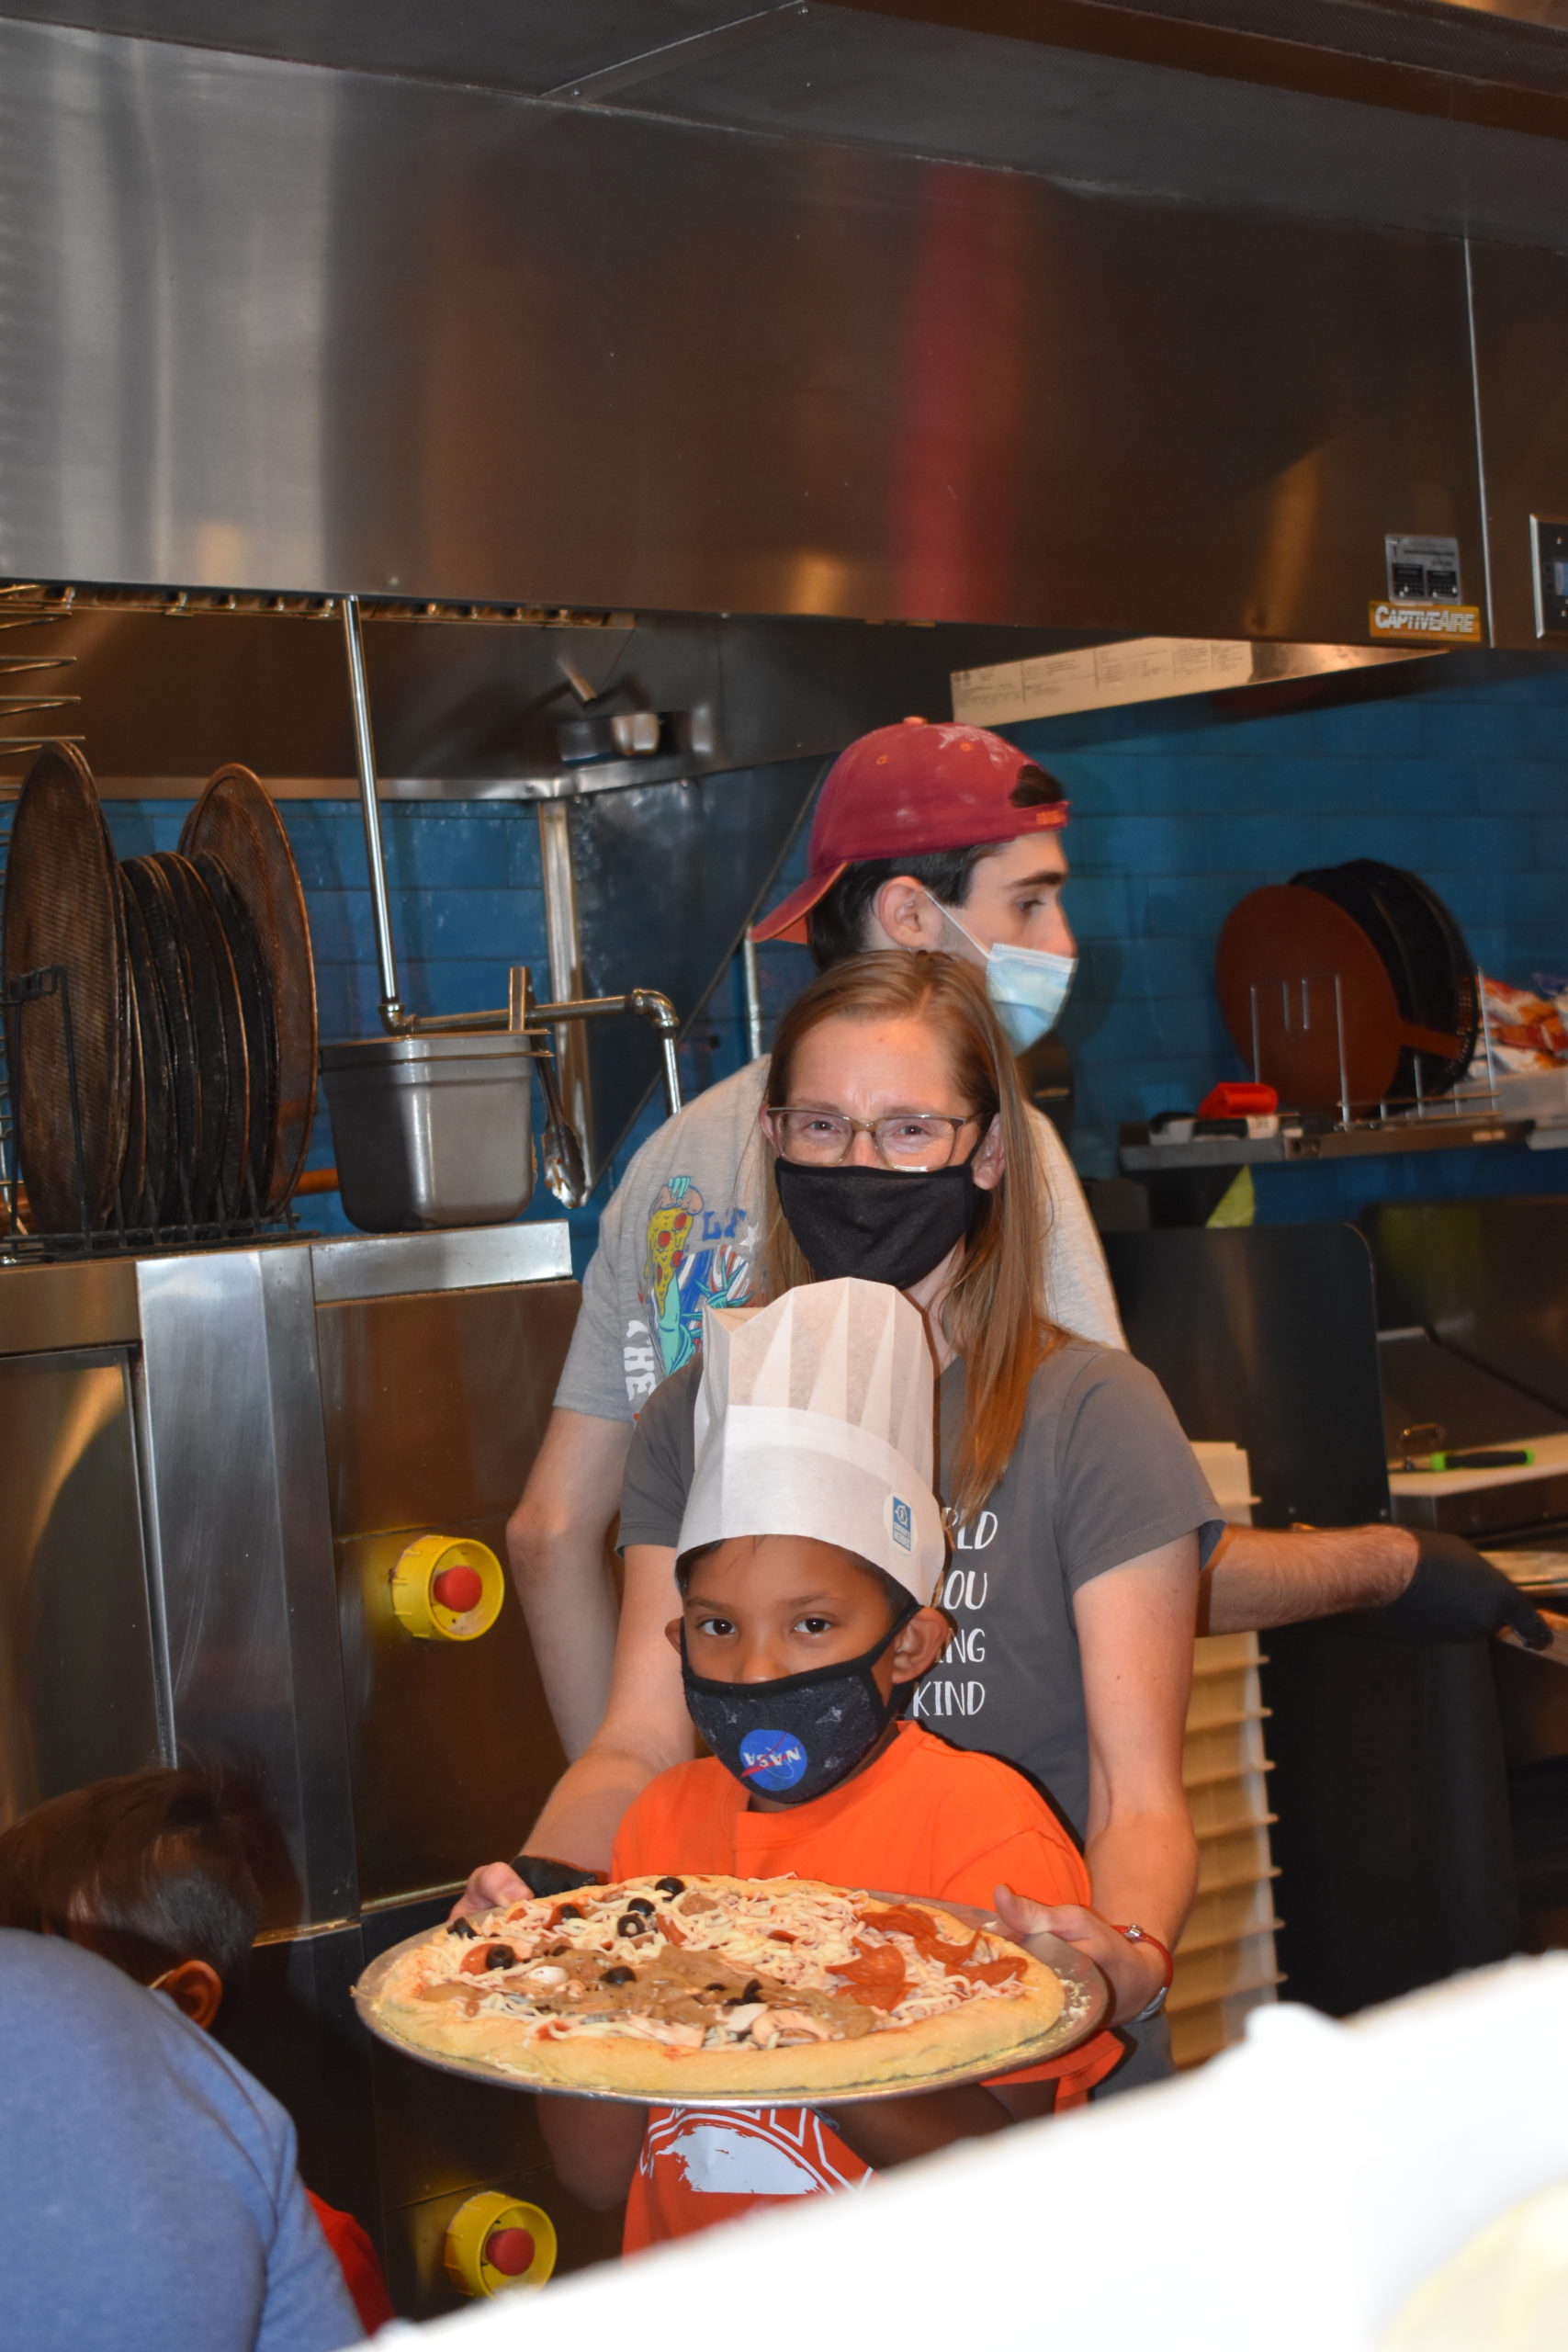 Image a child carrying an uncooked pizza into the kitchen of a restaurant